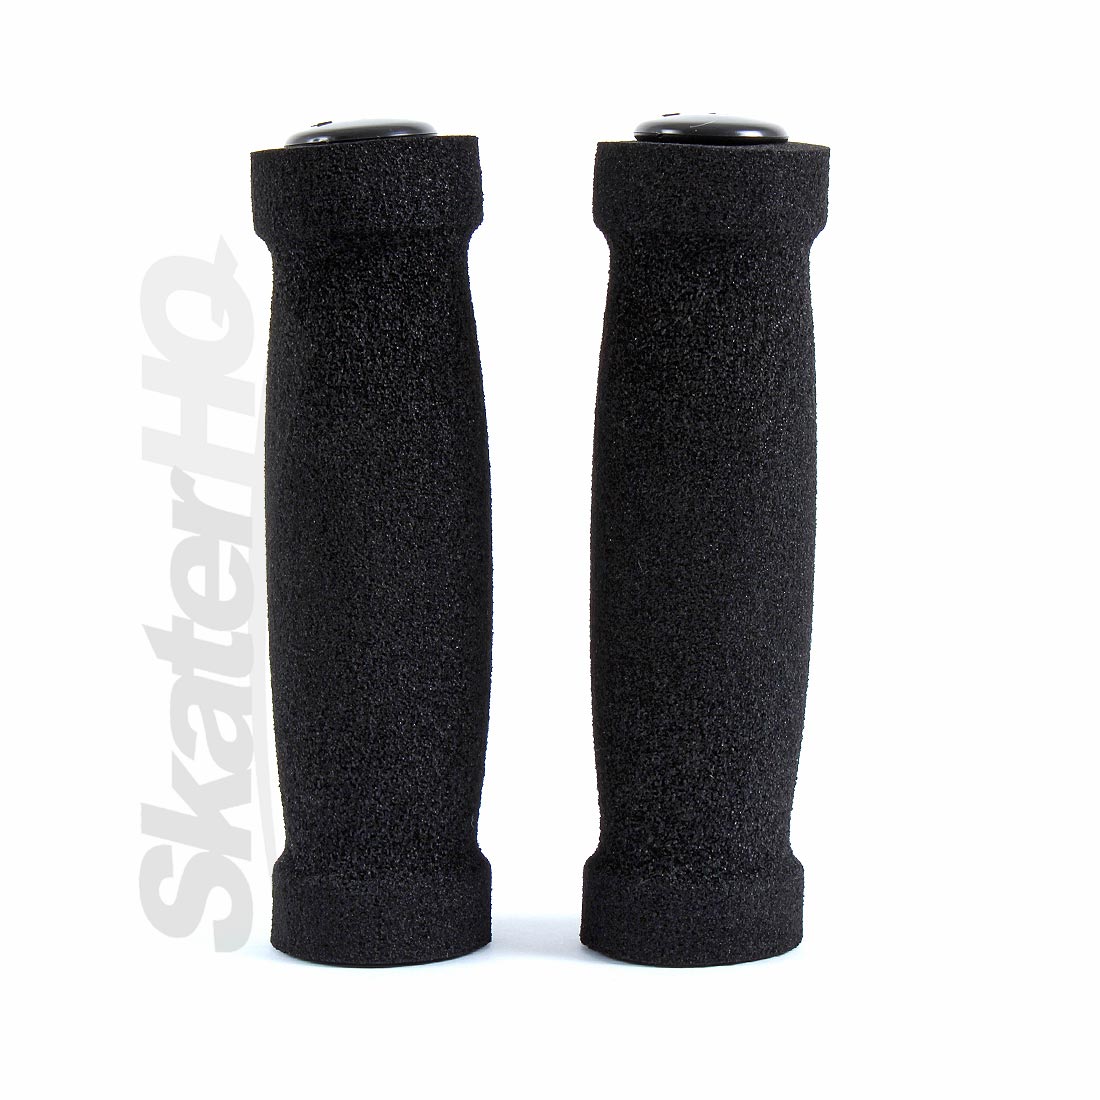 Mini Scooter Handle Grip Foam with End Plugs Scooter Grips